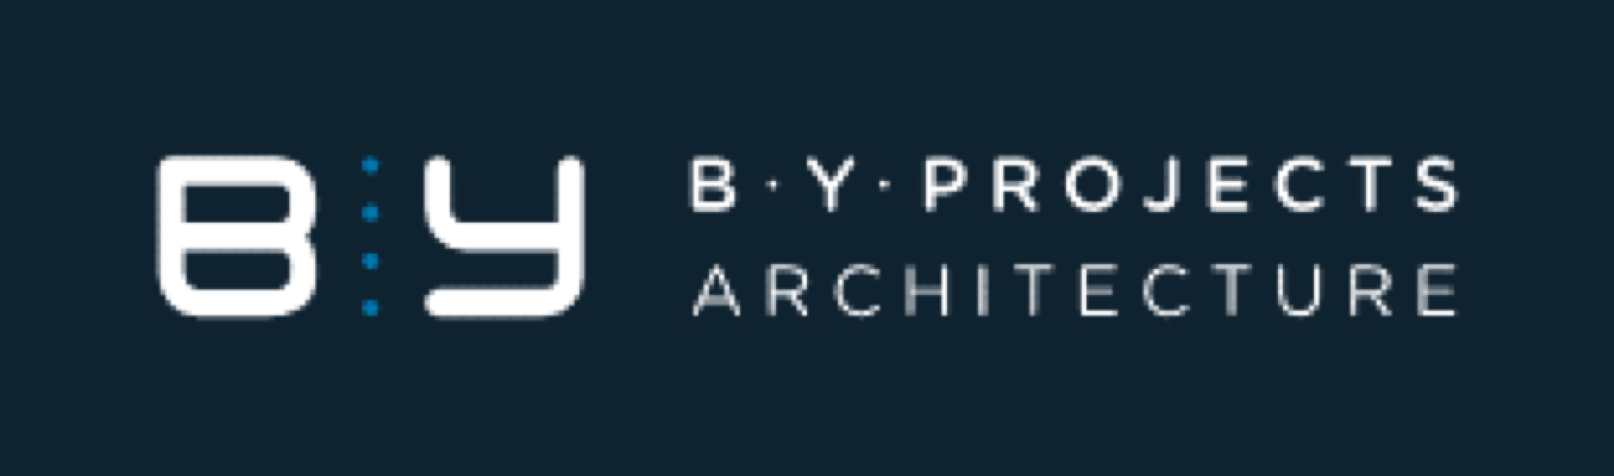 BYP Projects Architecture Logo